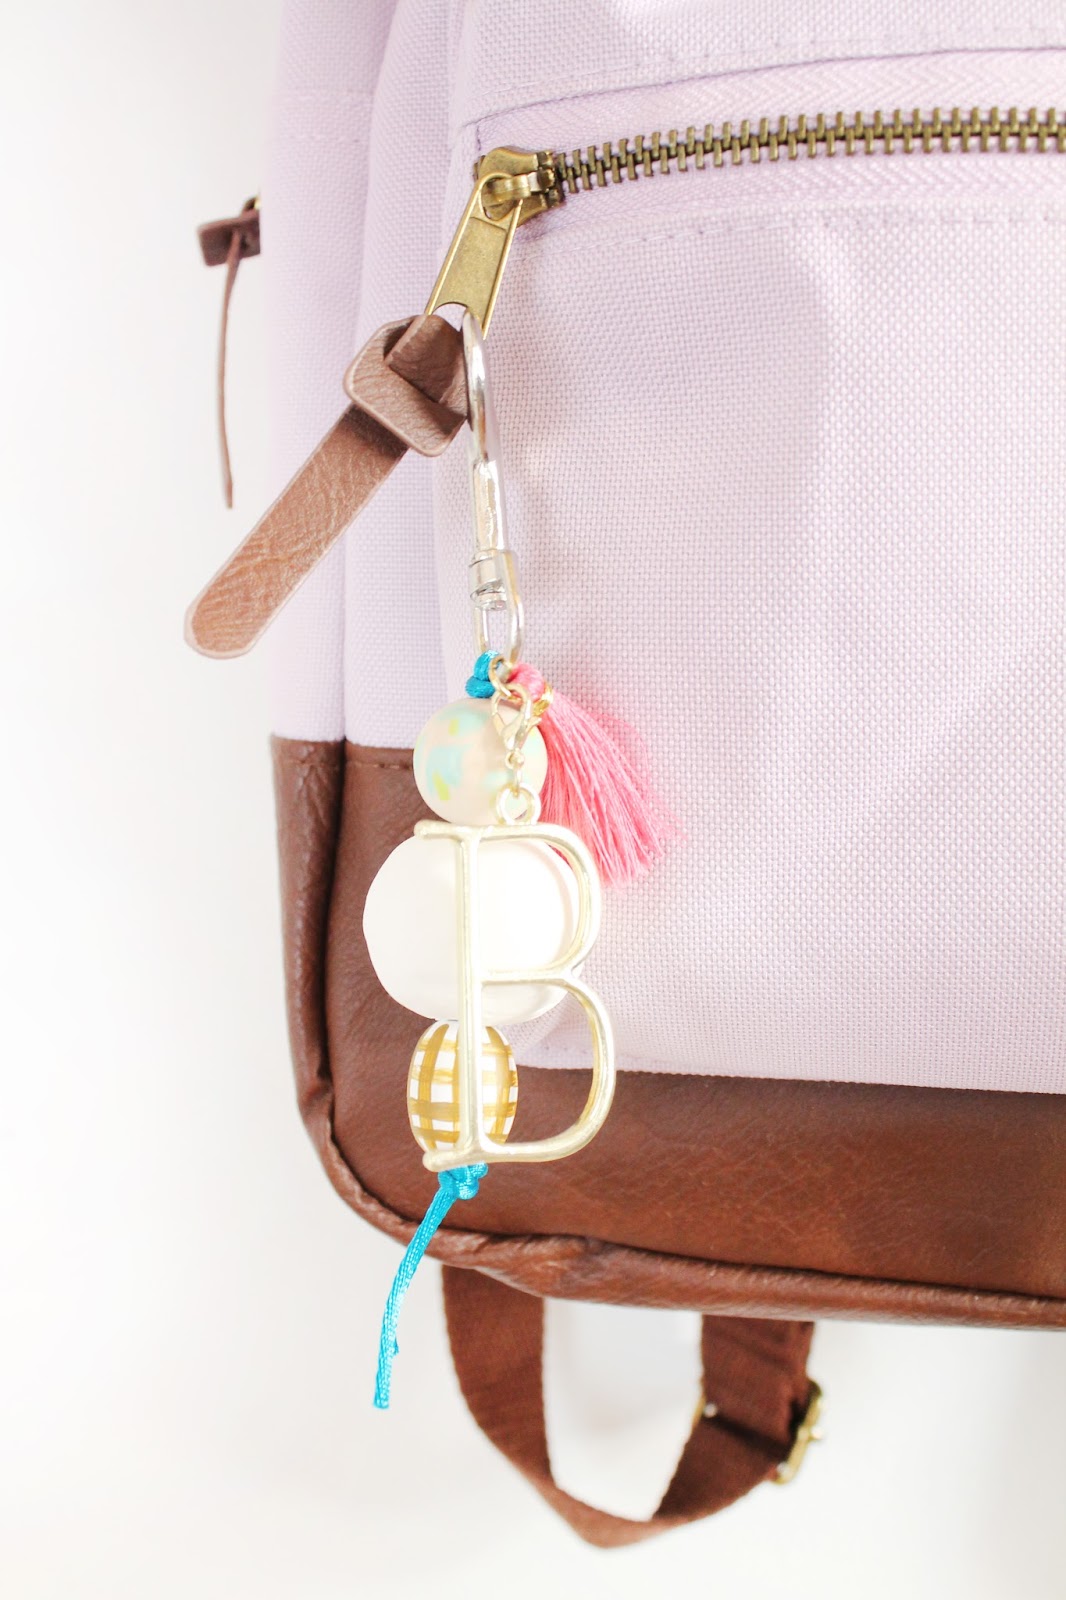 Make a Diffuser Keychain for Essential Oils